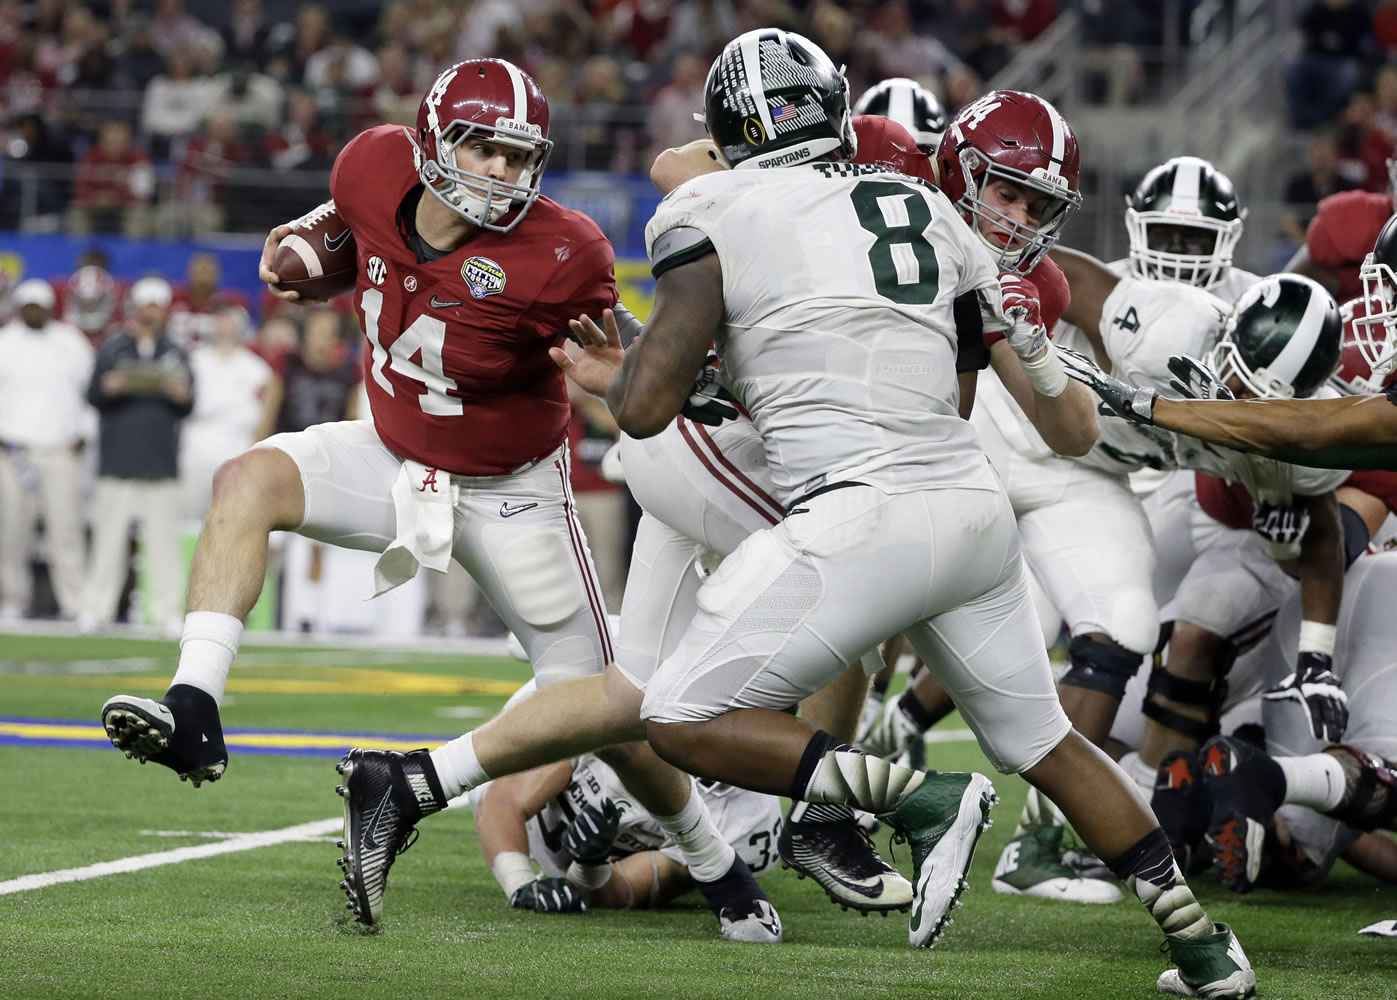 Alabama quarterback Jake Coker (14) tries to escape Michigan State defense during the second half of the Cotton Bowl NCAA college football semifinal playoff game, Thursday, Dec. 31, 2015, in Arlington, Texas.